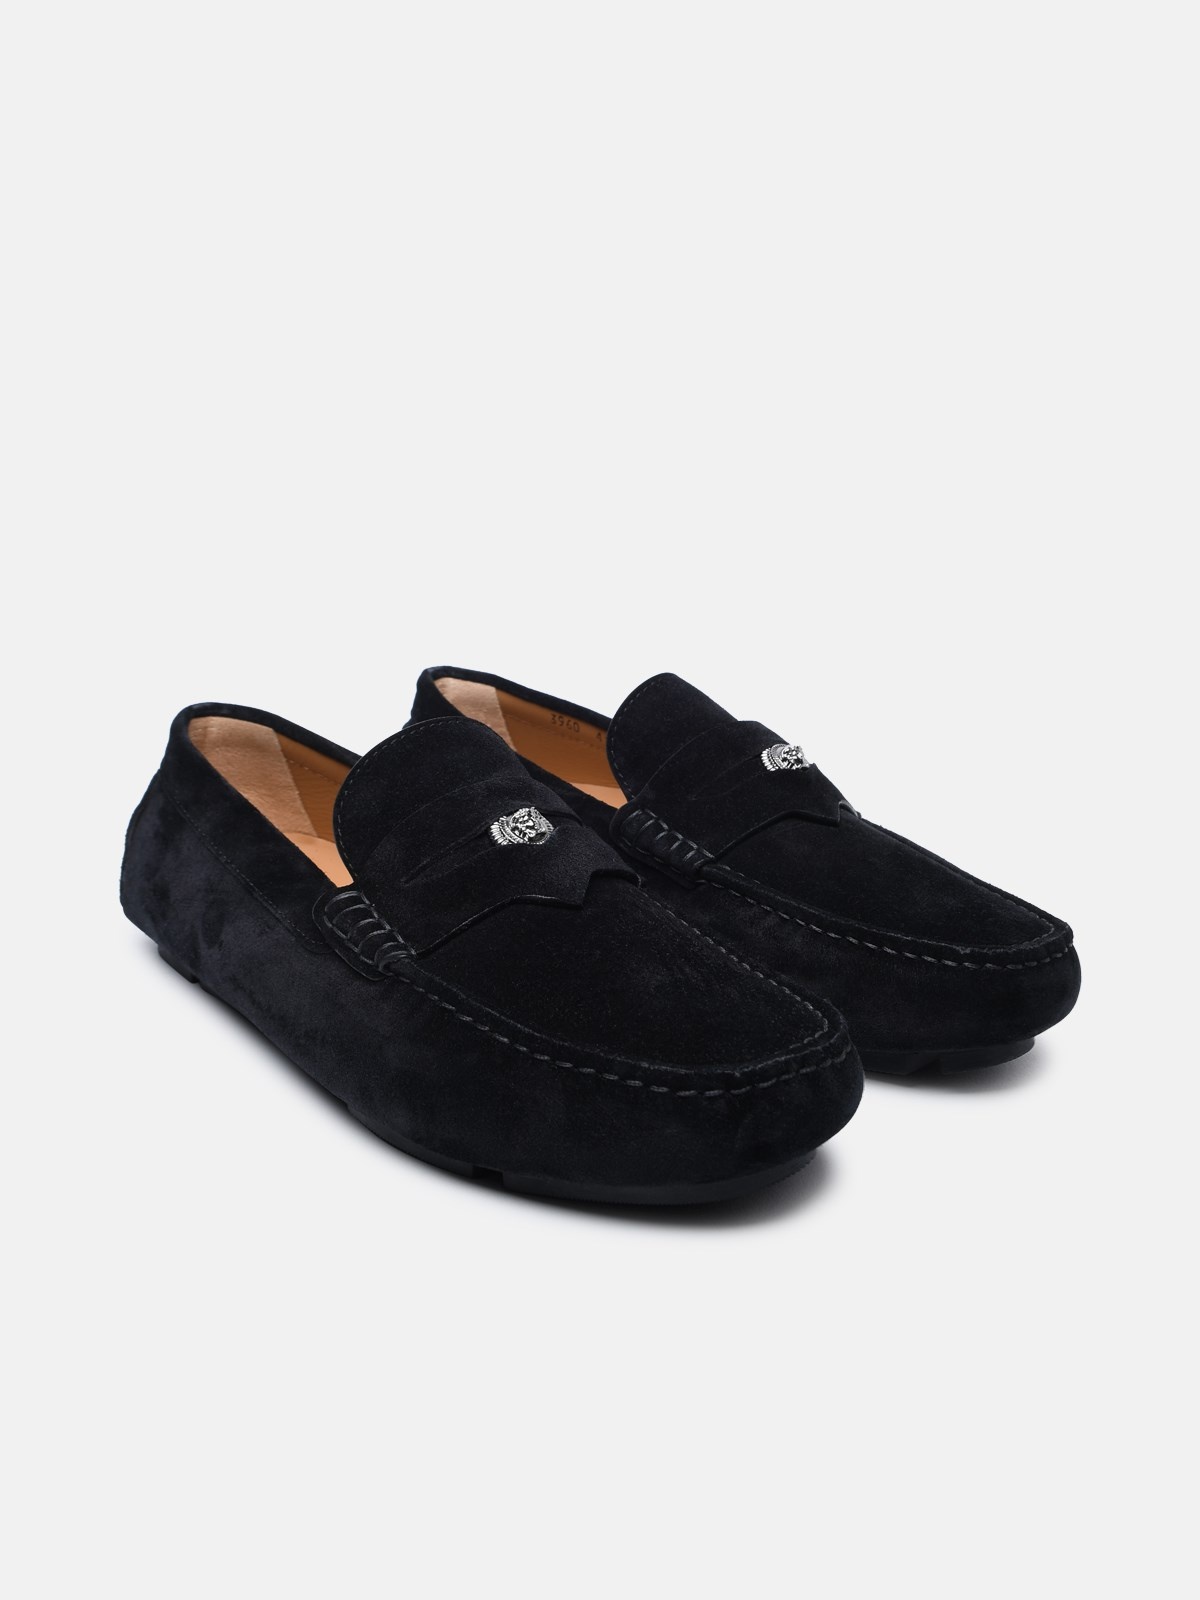 BLACK SUEDE LOAFERS - 2